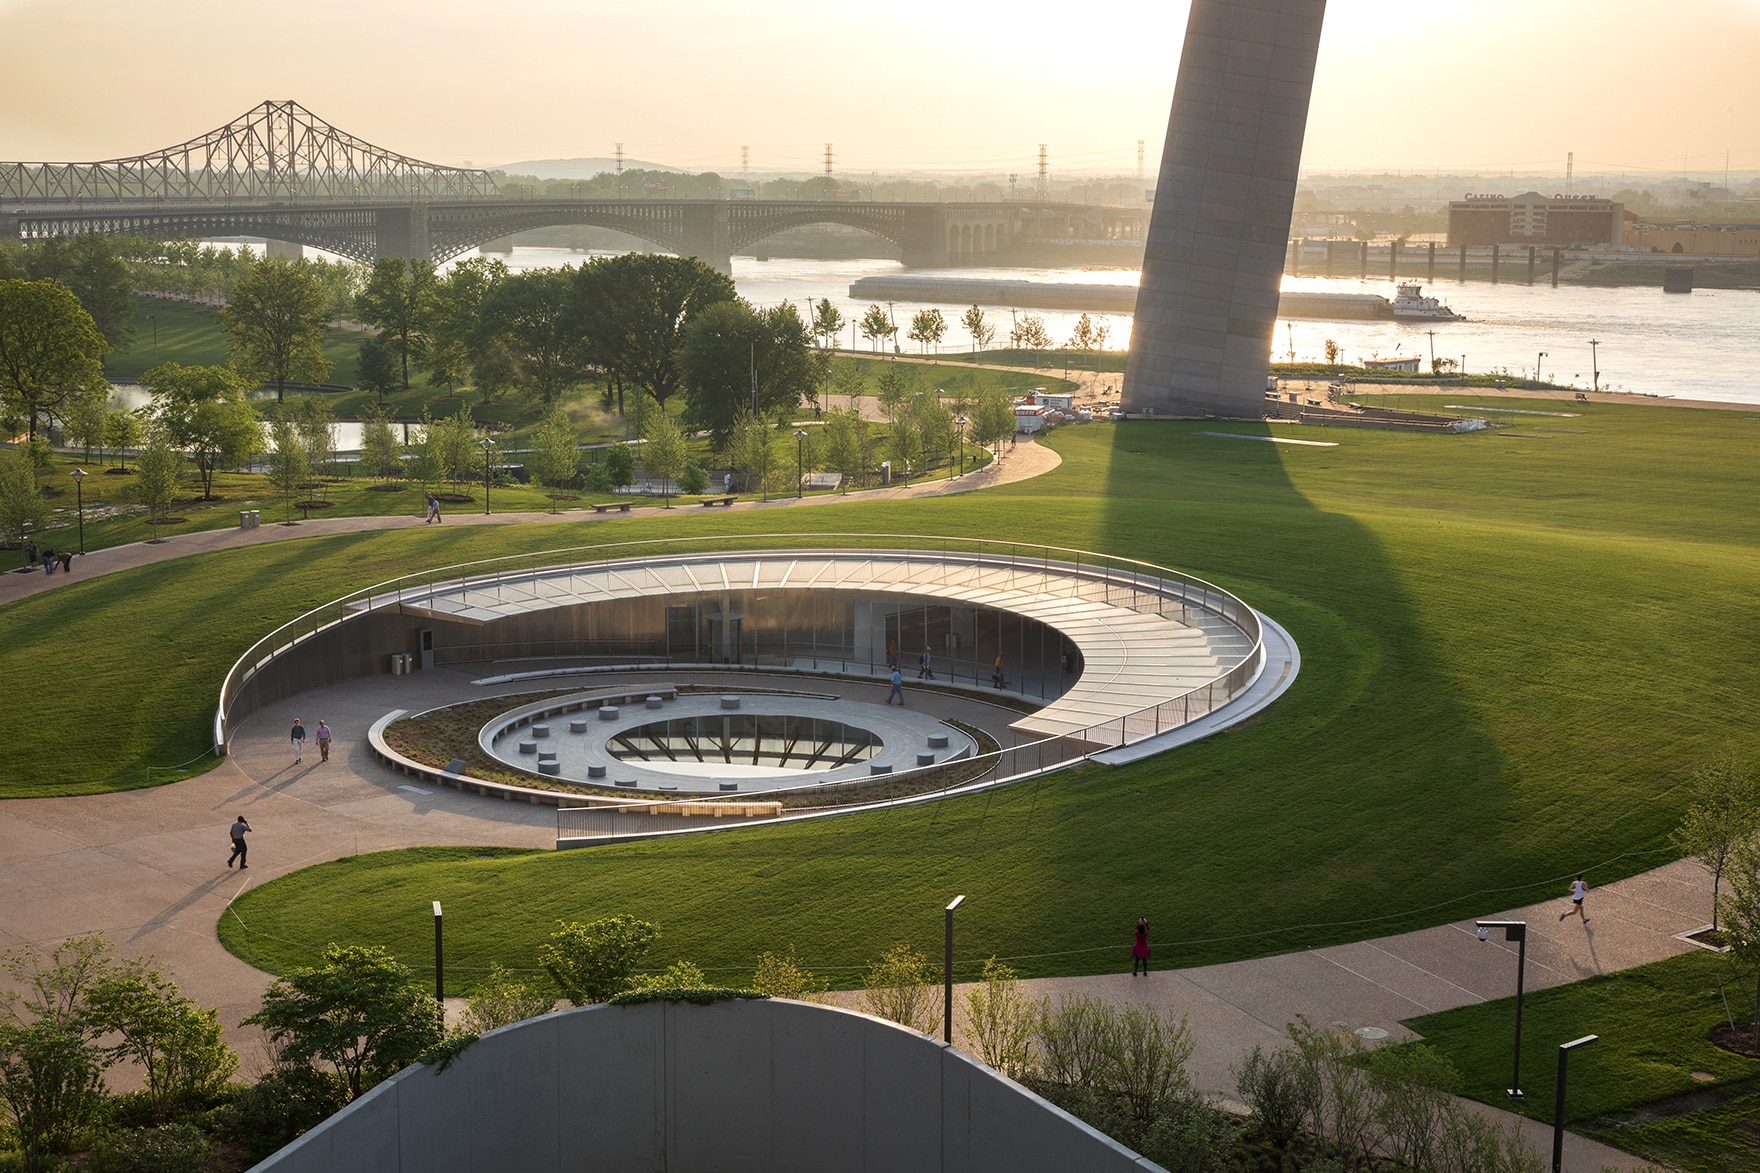 Museum Architecture Firms in St. Louis